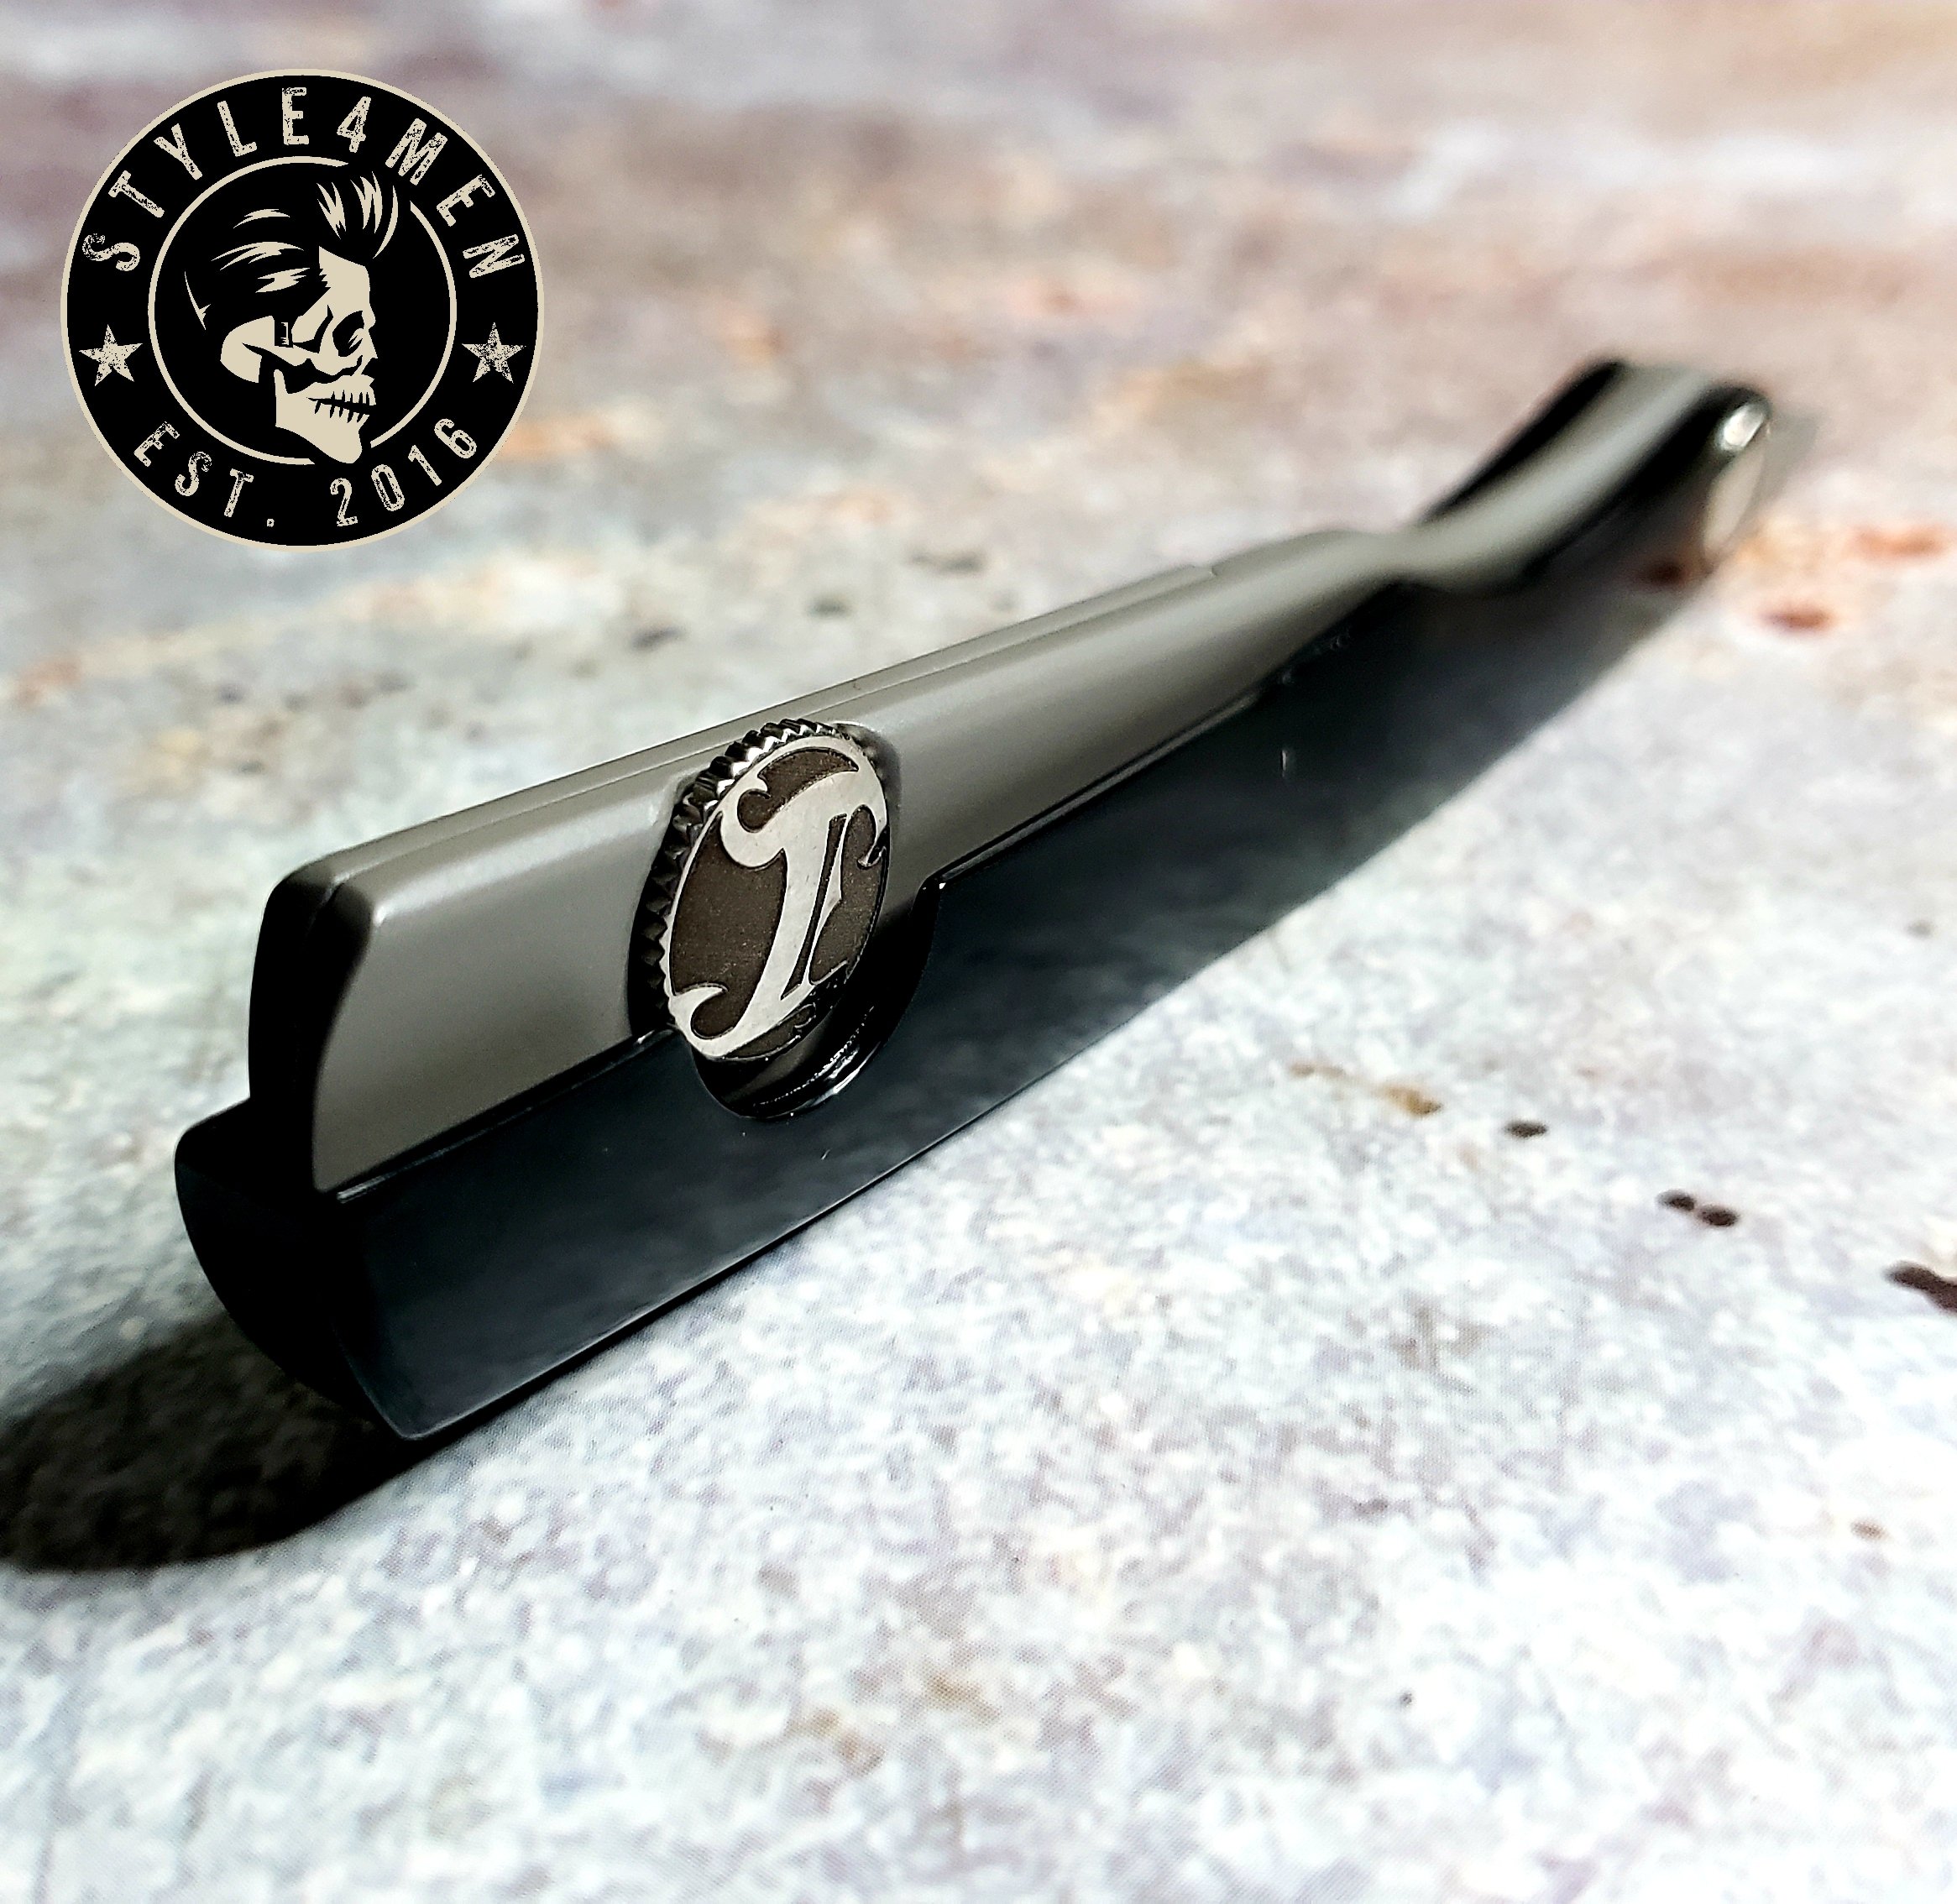 The innovative straight razor by the Irving Barber Co.